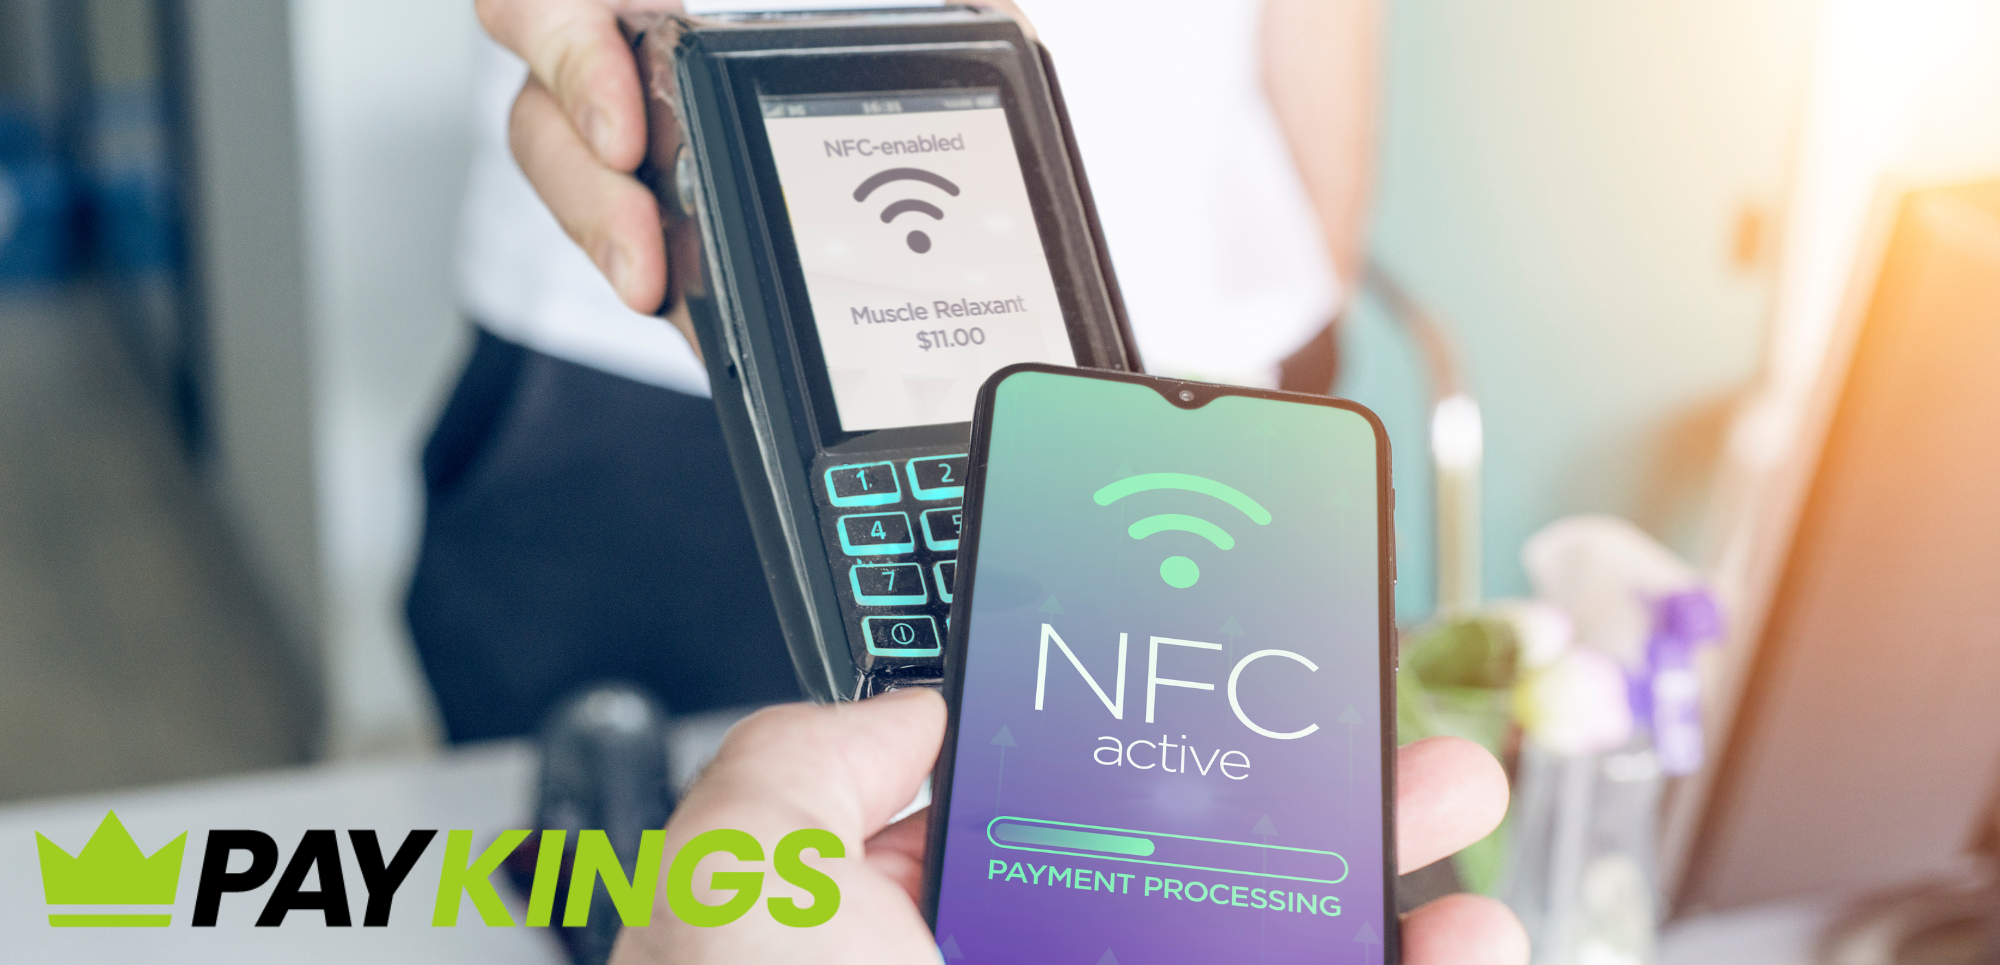 Mobile Payment Solutions: Modernizing the Way We Transact